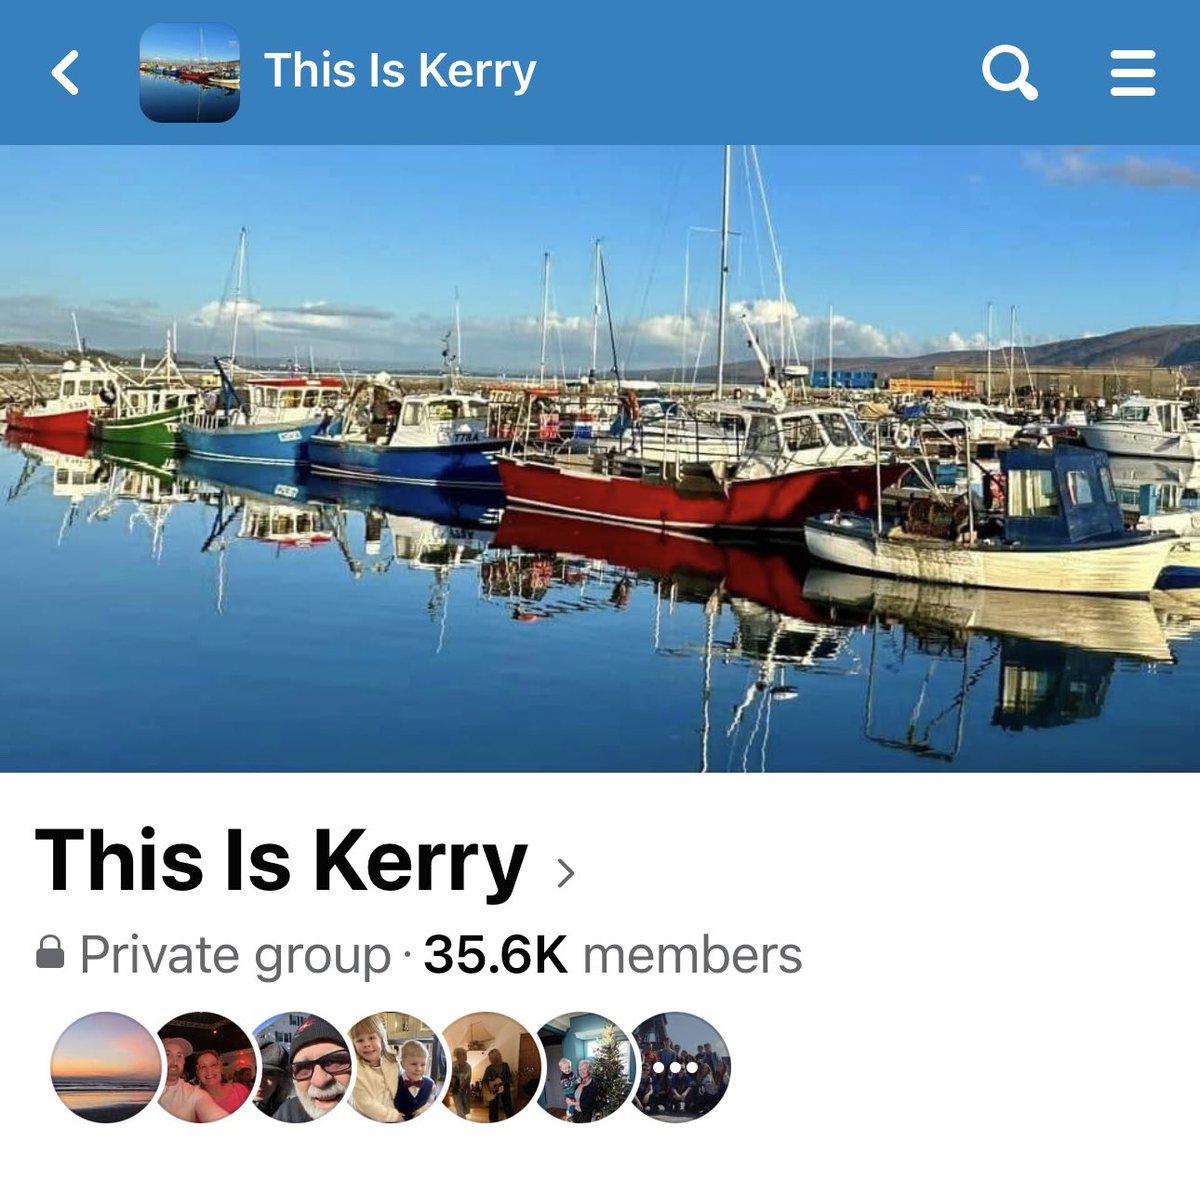 😊 “This is Kerry” Facebook page has chosen one of the recent pics I took at Fenit recently, kinda chuffed 😊 #Fenit #boats #sunset #colours #fishingvillage #noplacelikehome #tralee #lovetralee #wildatlanticwaykerry #visittralee #springtime